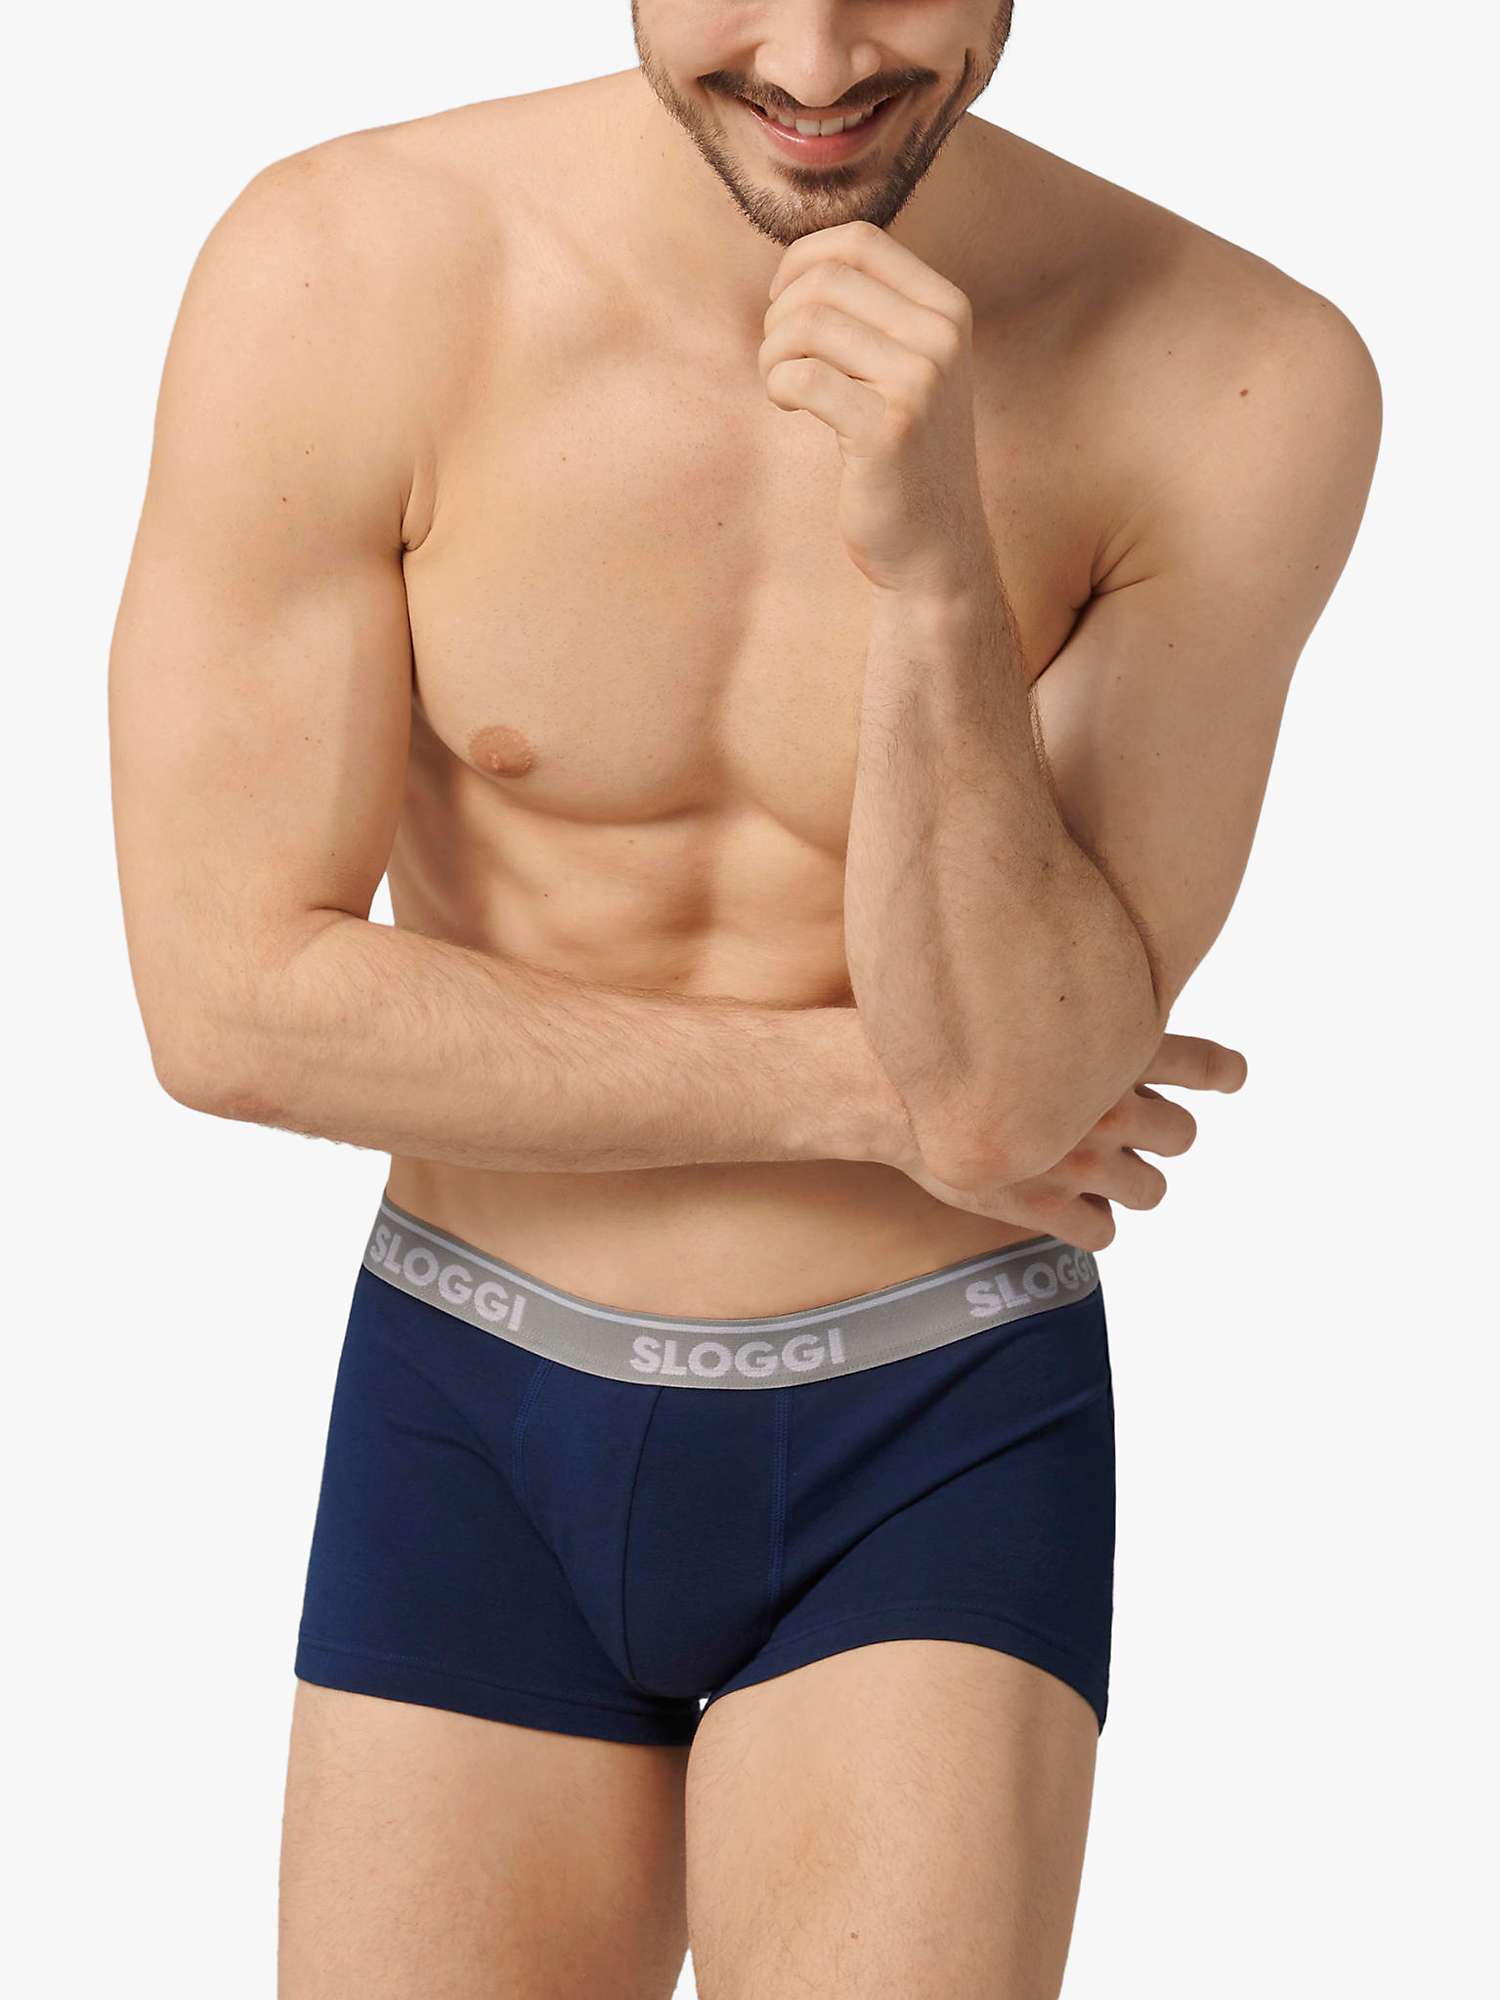 Buy sloggi GO ABC Cotton Stretch Hipster Trunks, Pack of 6, Grey Online at johnlewis.com